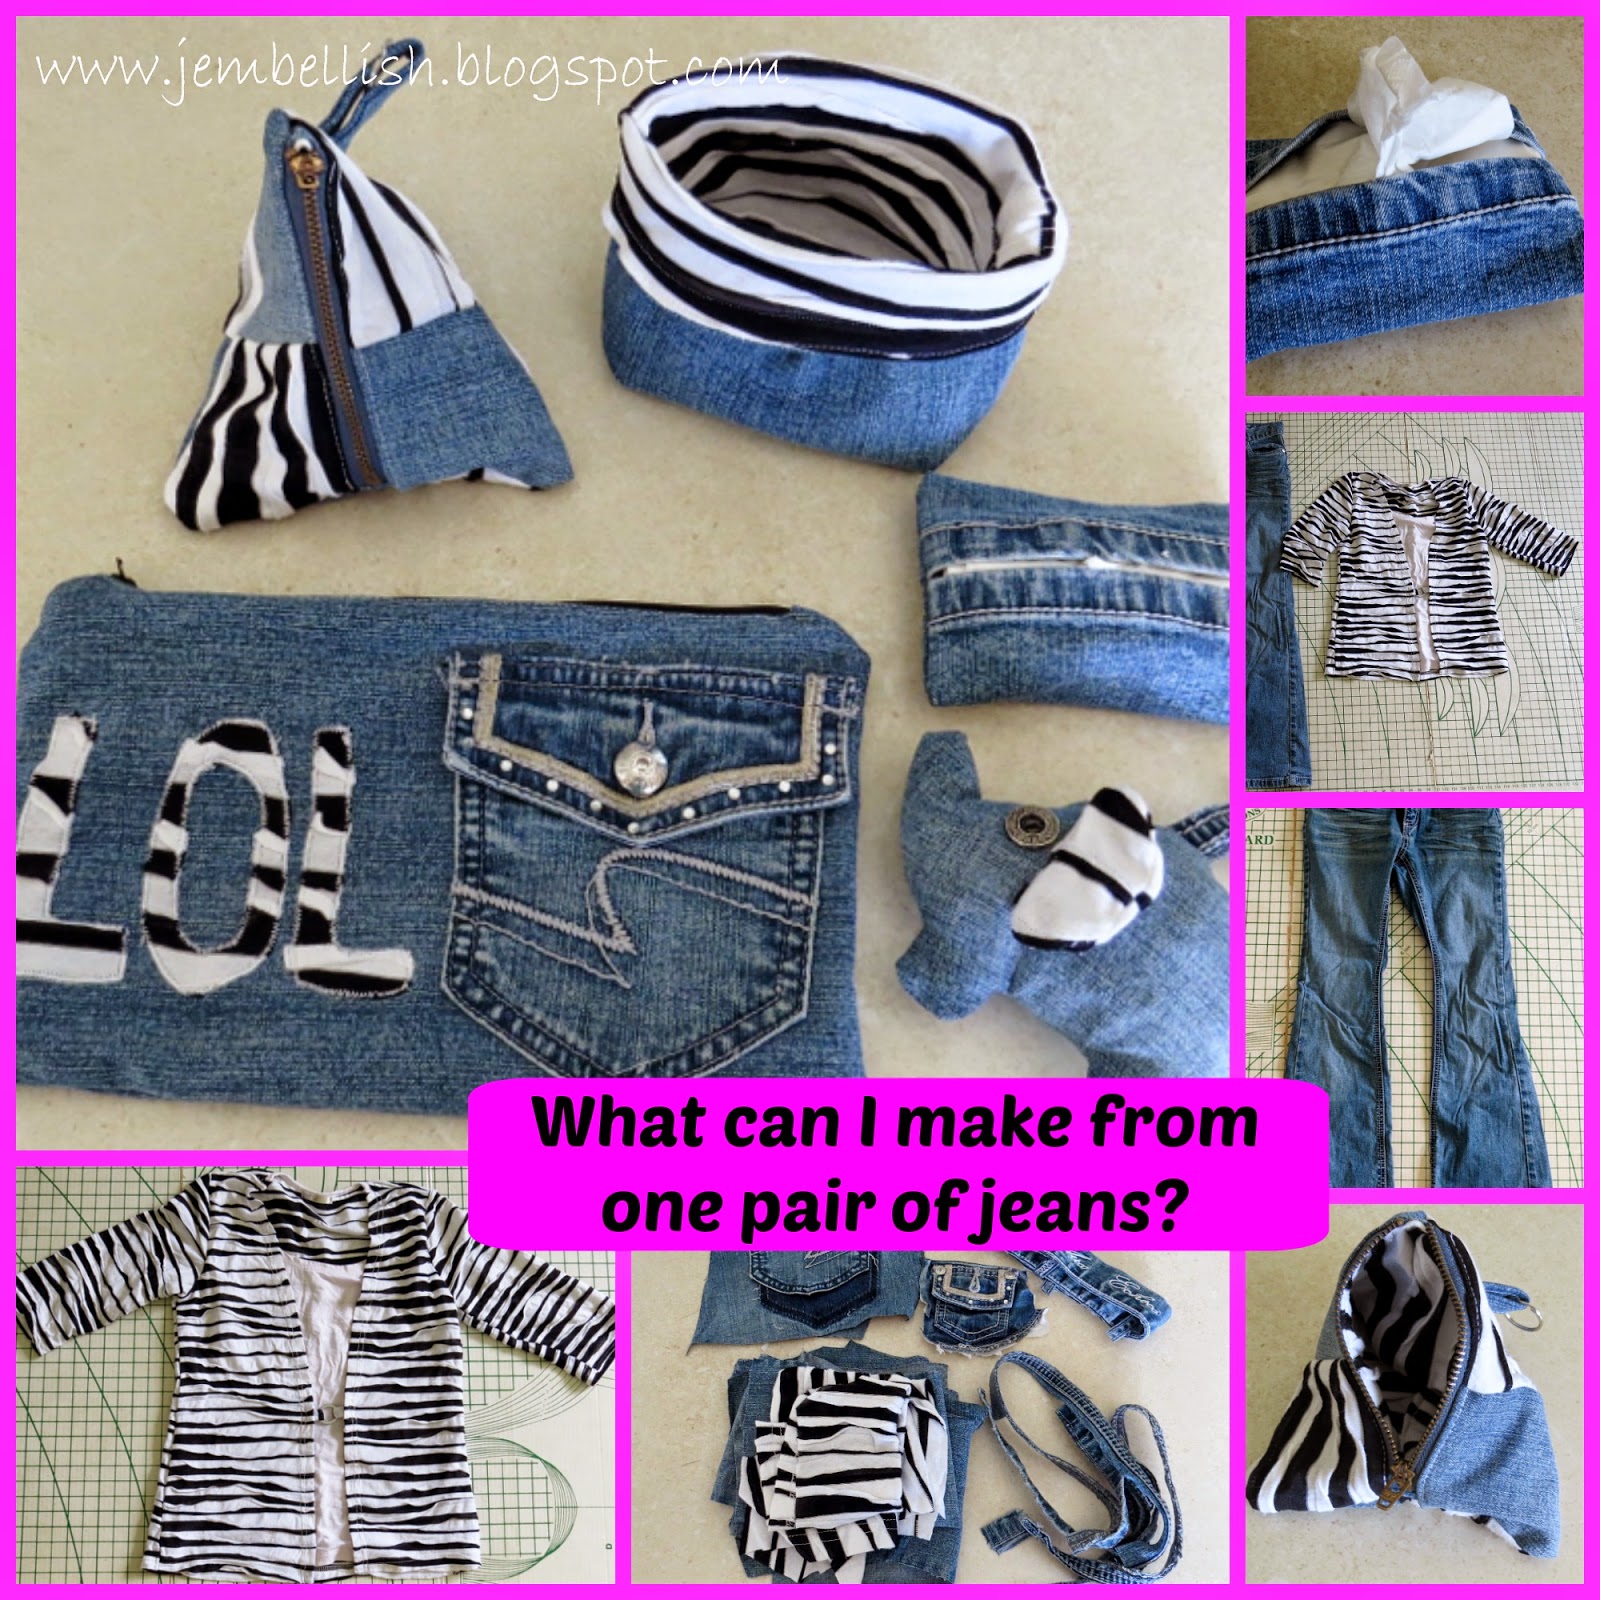 What can I make from one pair of jeans?